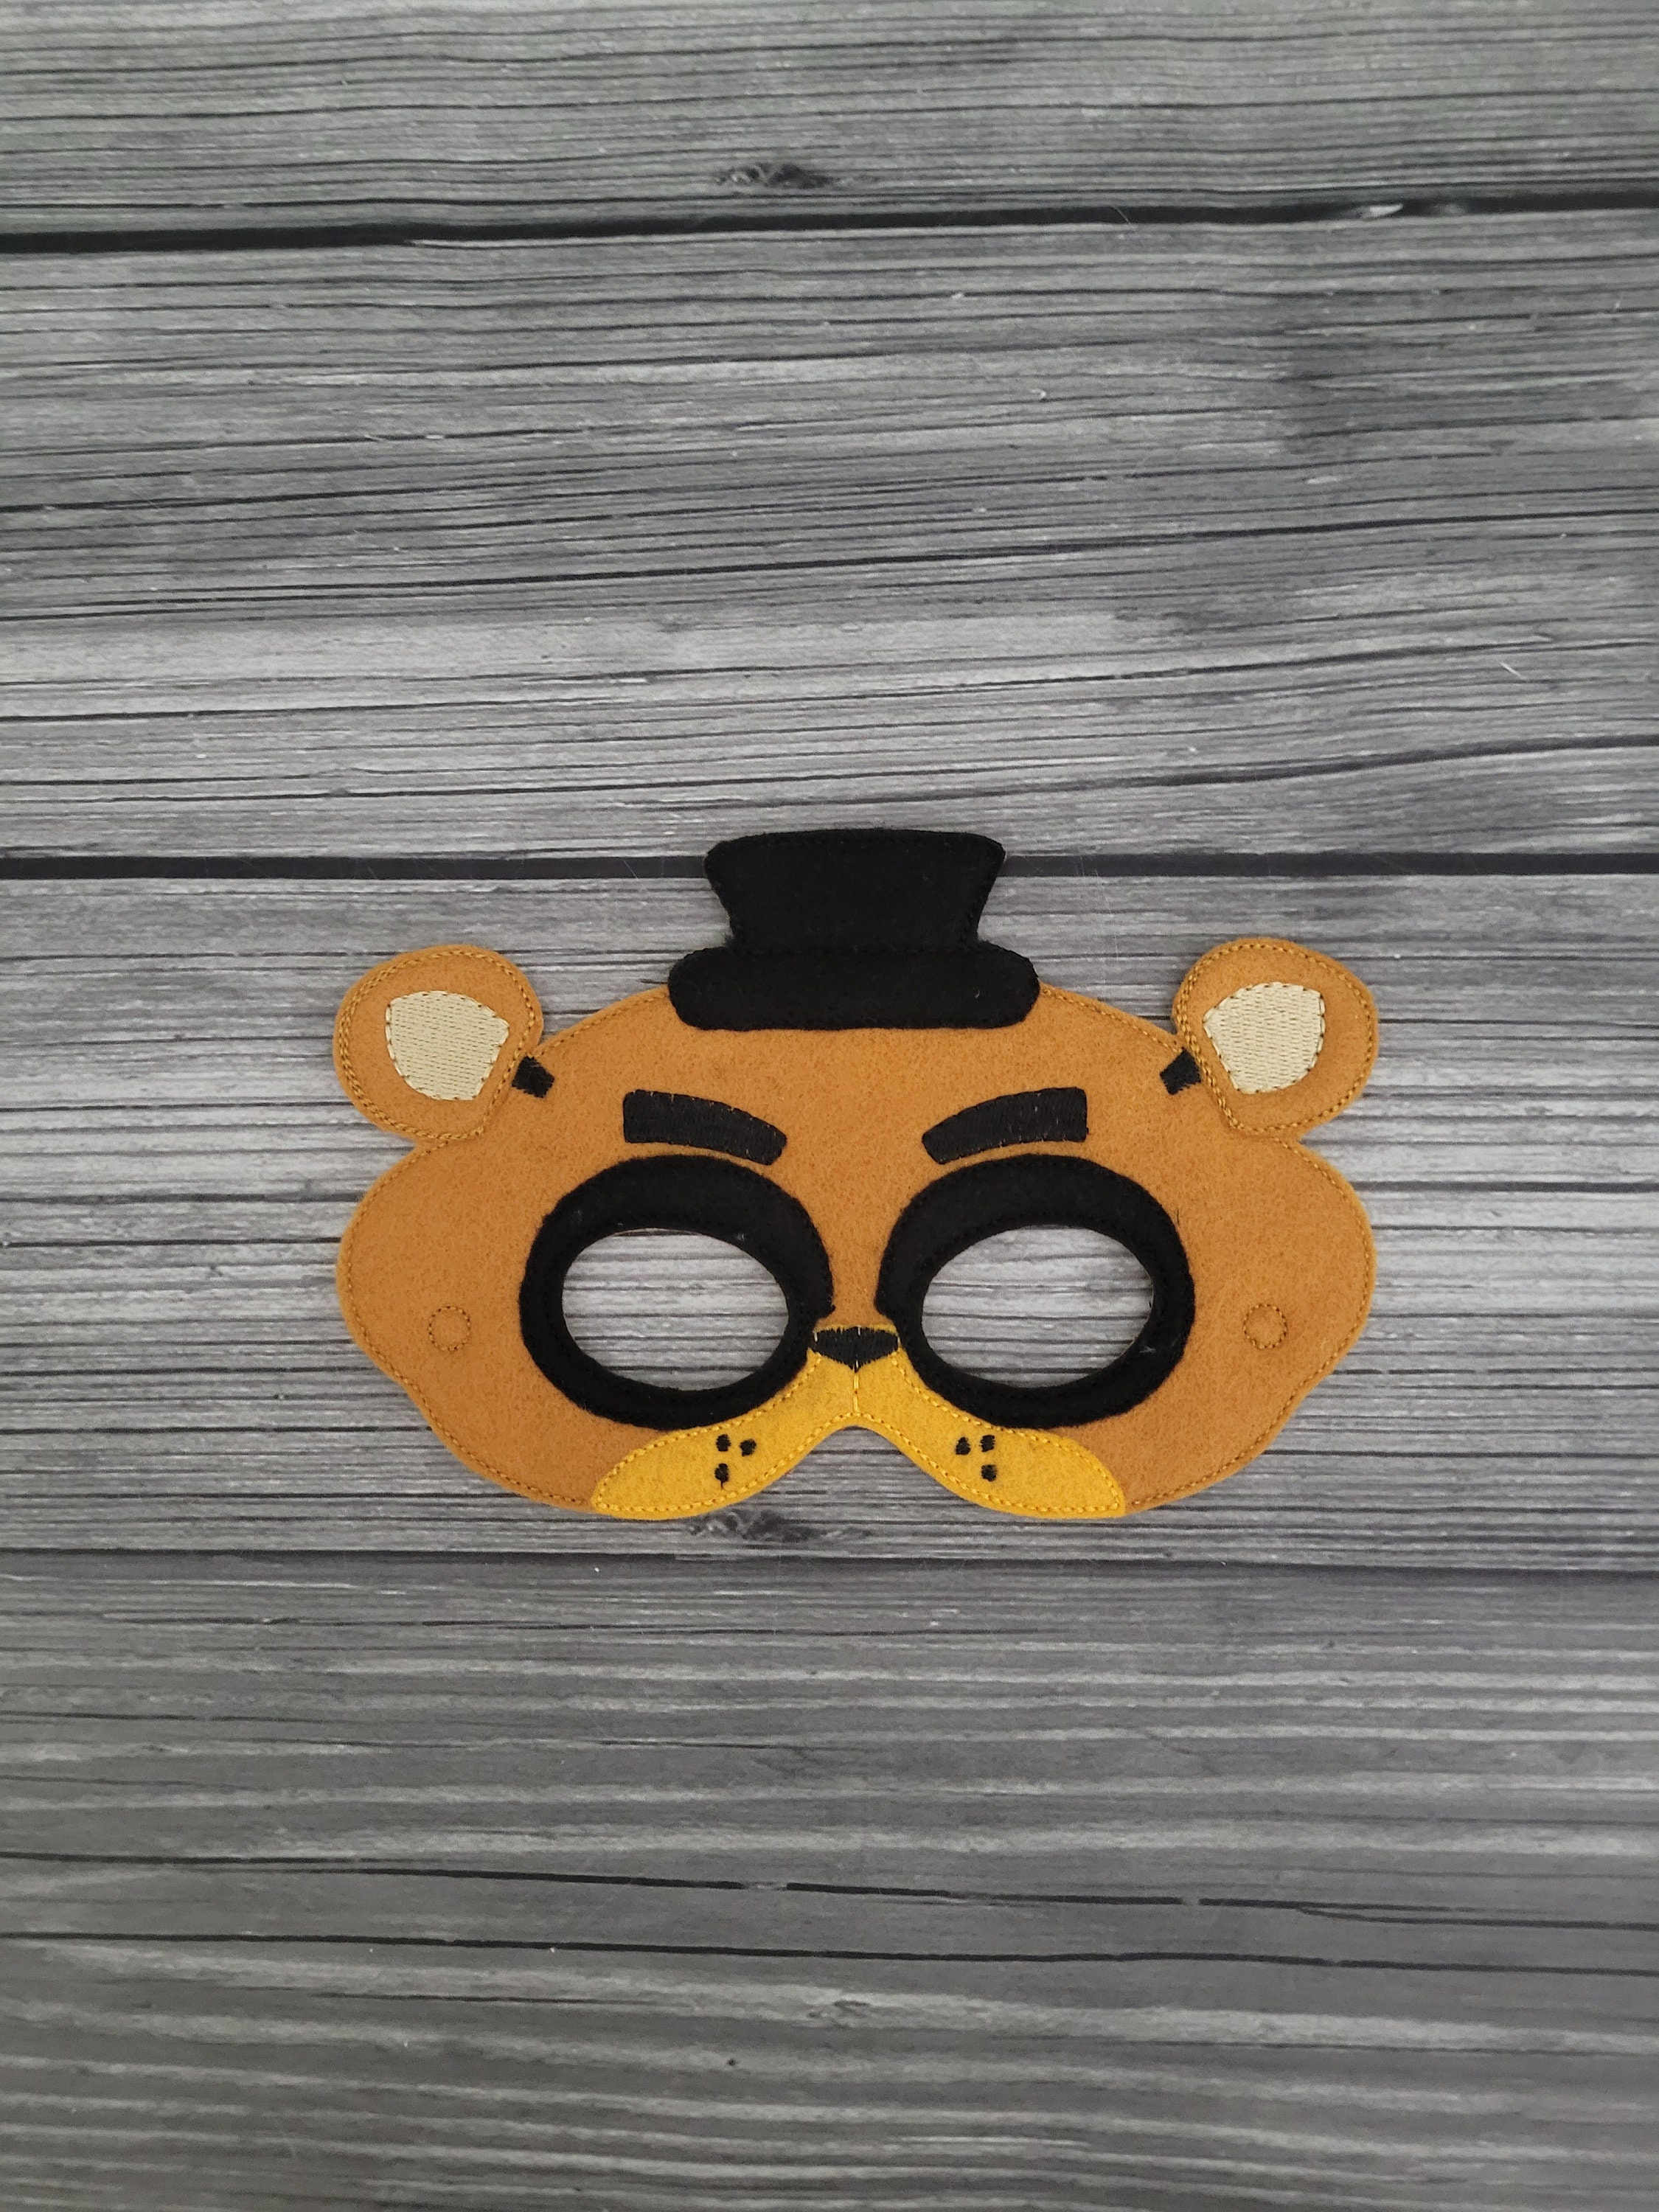 【New Arrival】Xcoser Five Nights at Freddy's Faz Bear Cosplay Mask Latex